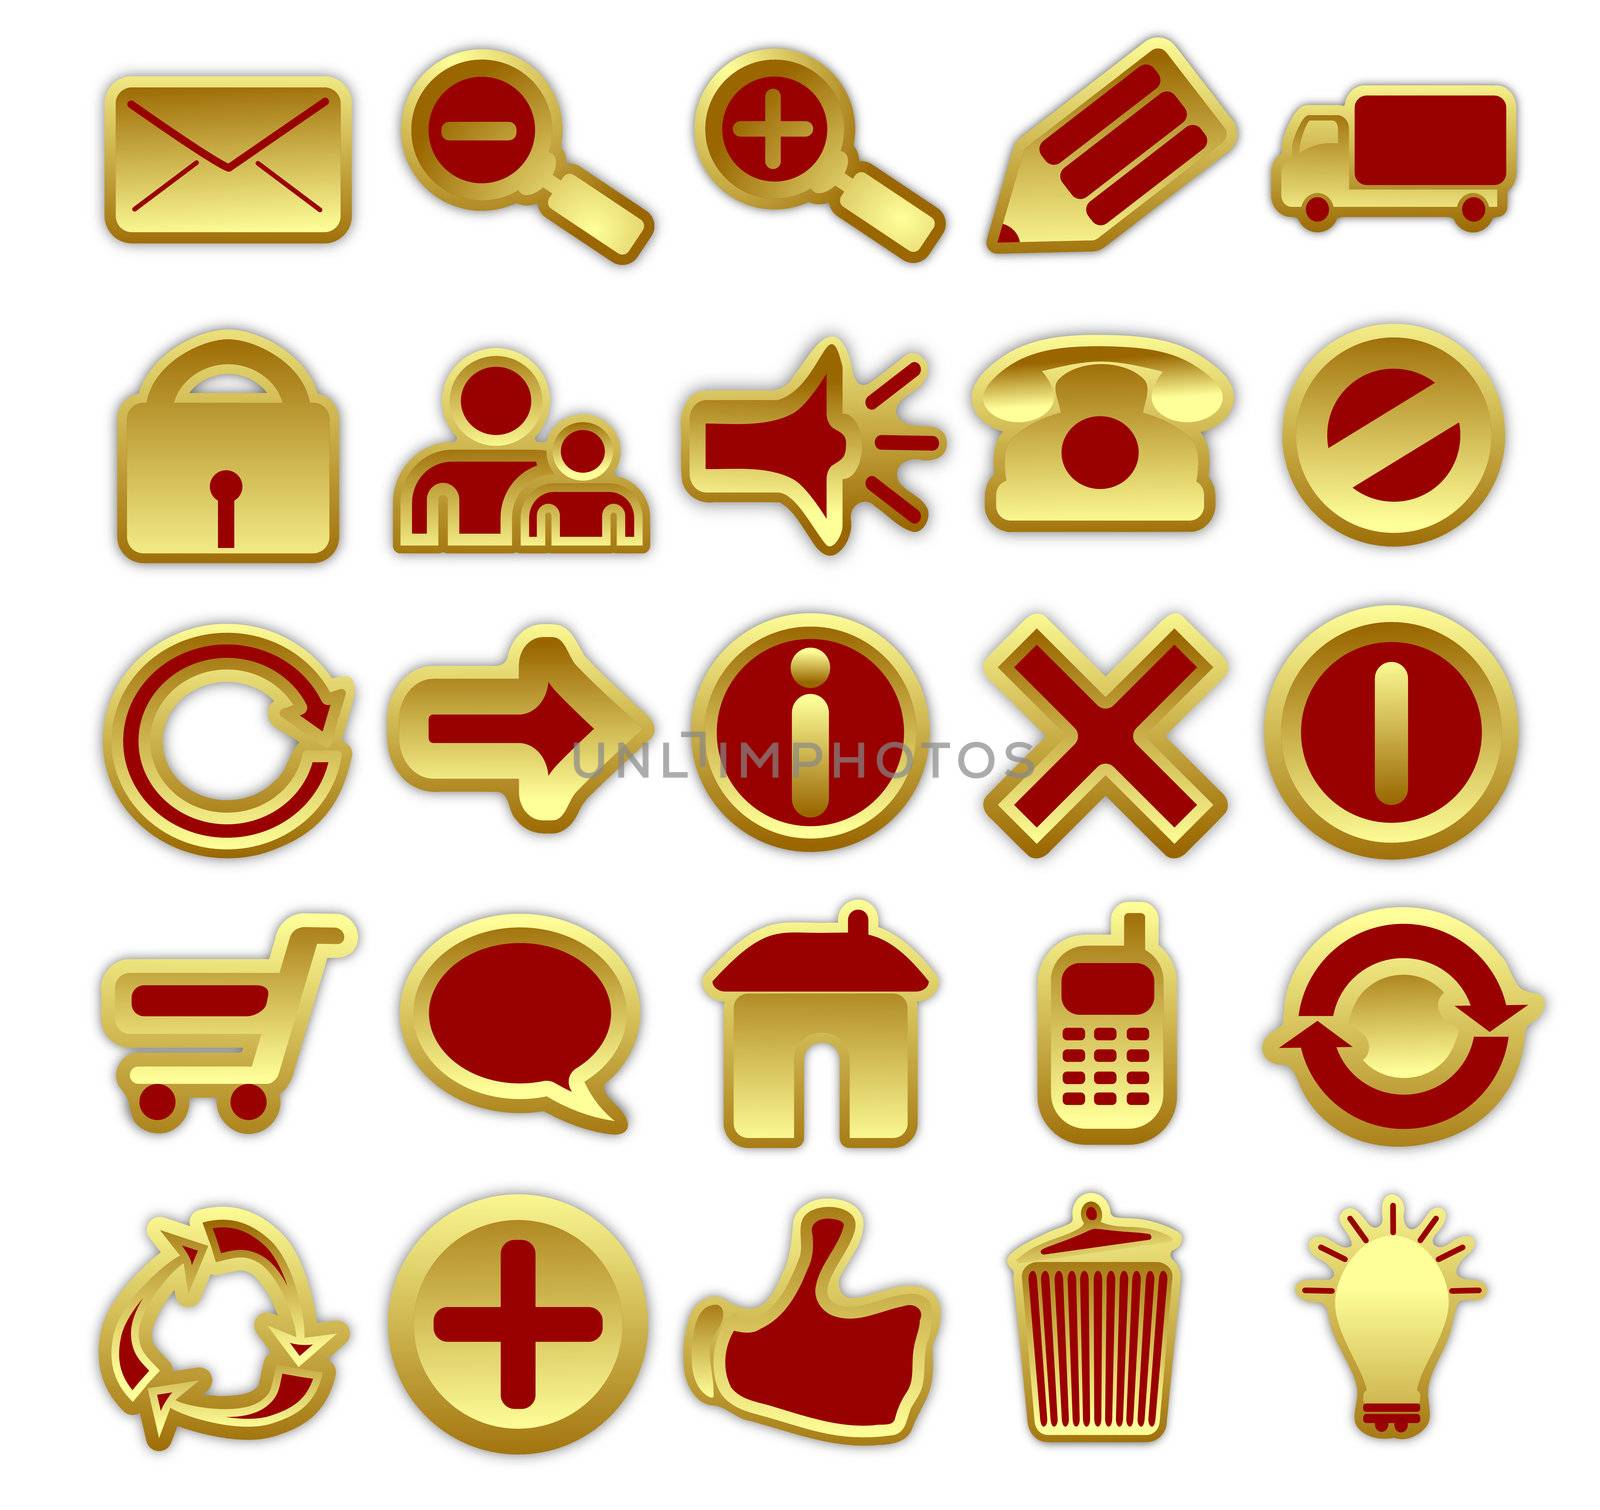 A collection of 25 web icons in golden and red color scheme